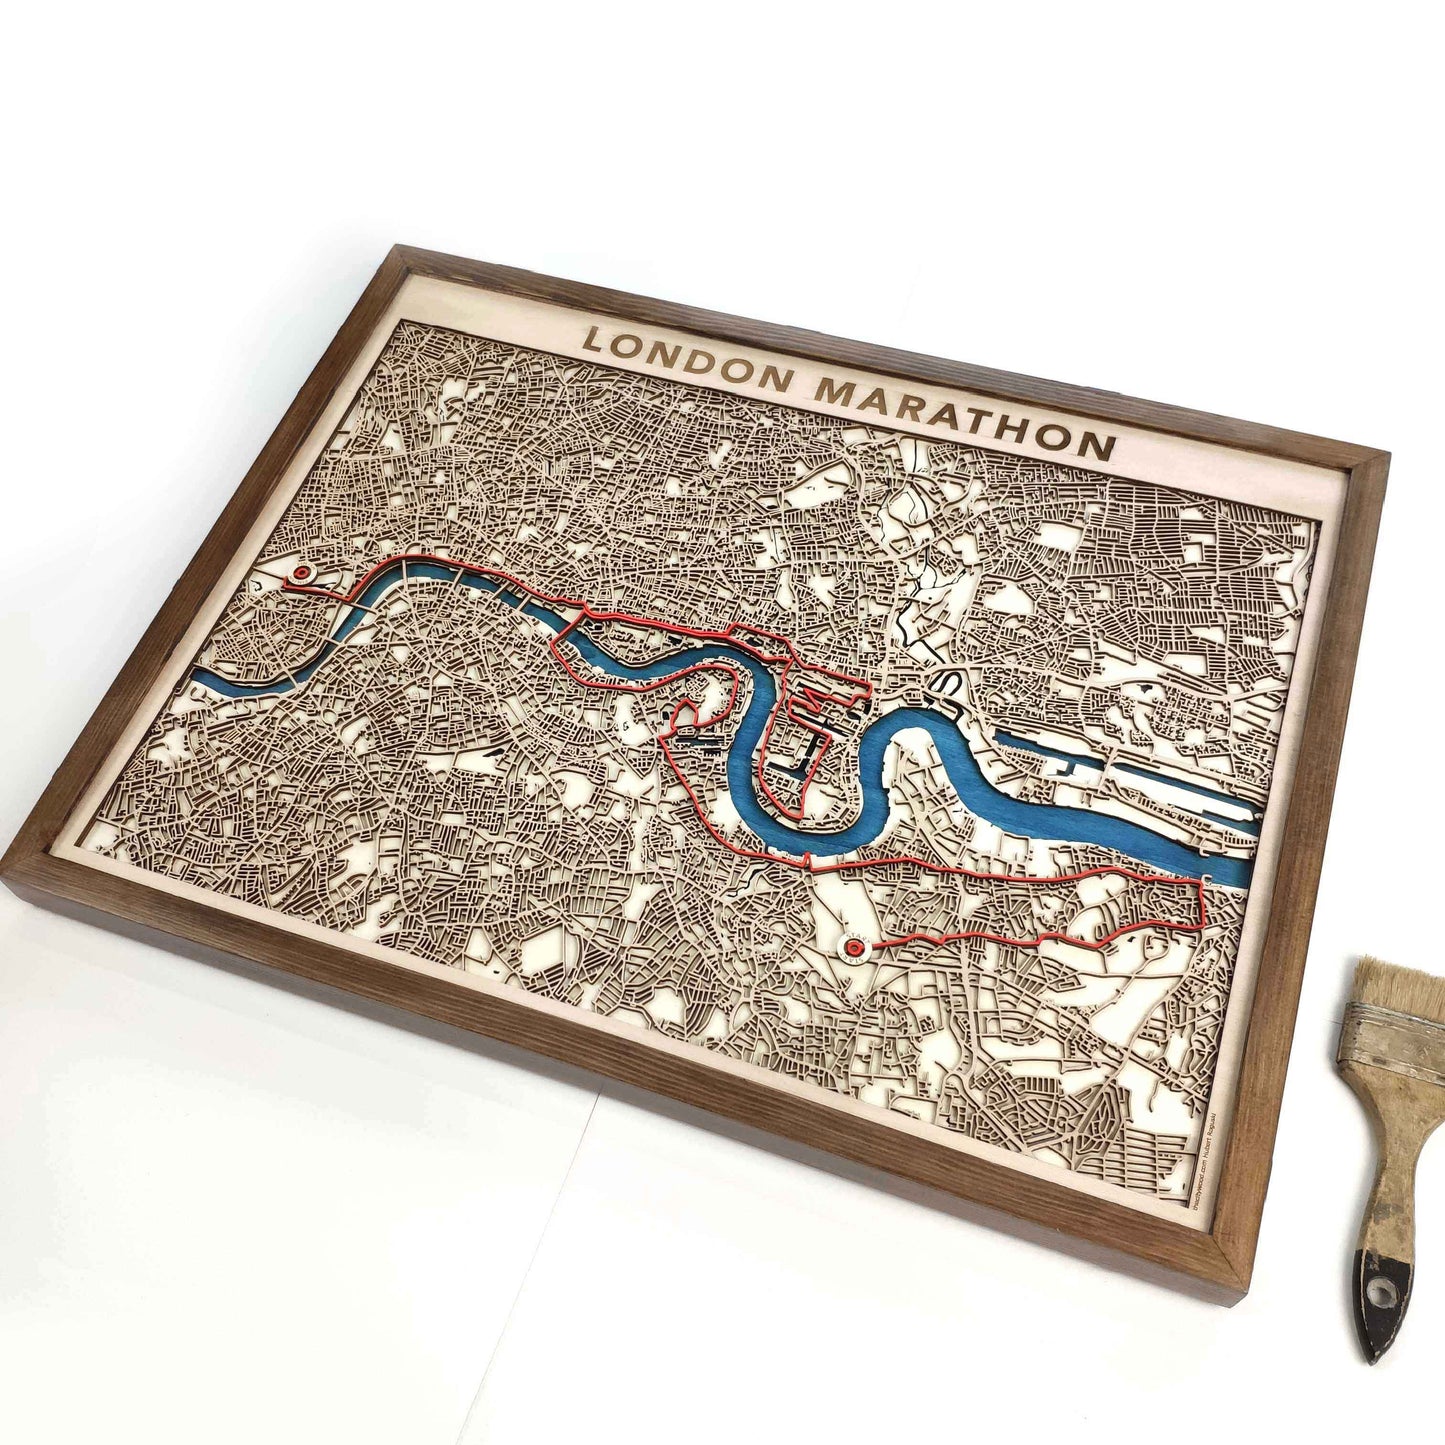 London Marathon Commemorative Wooden Route Map – Collector's Item by CityWood - Custom Wood Map Art - Unique Laser Cut Engraved - Anniversary Gift